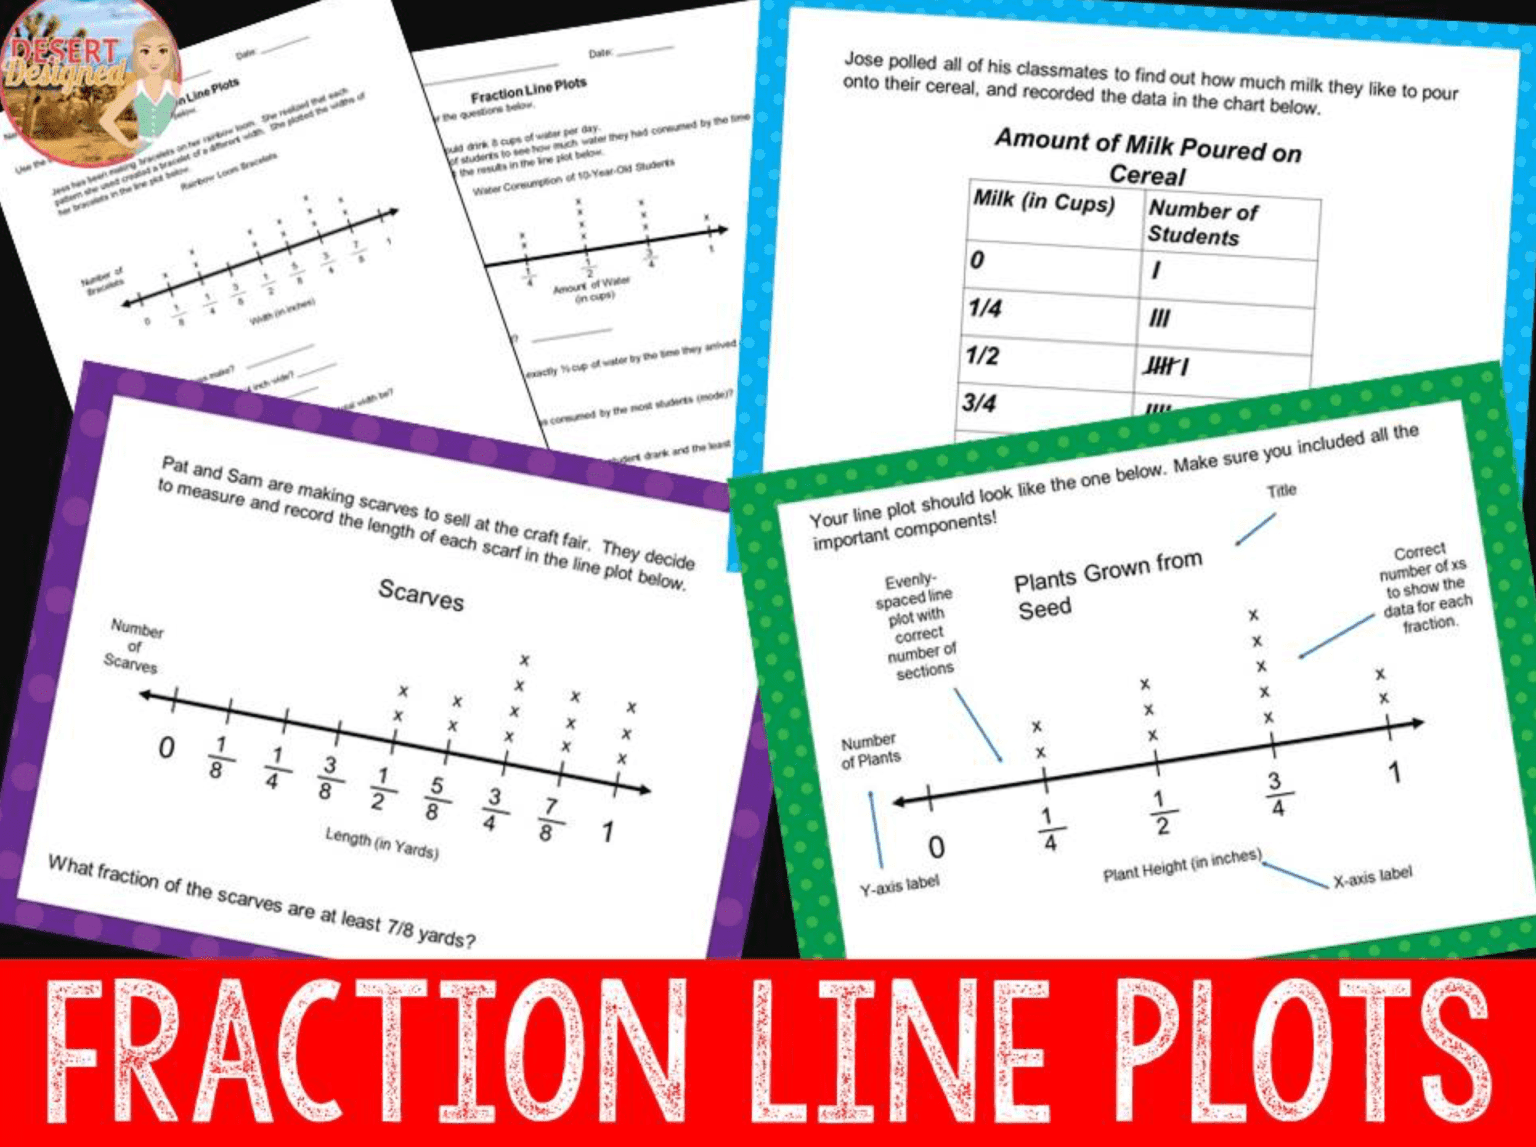 5 Things You Need to Know Before Teaching Fraction Line Plots - Desert